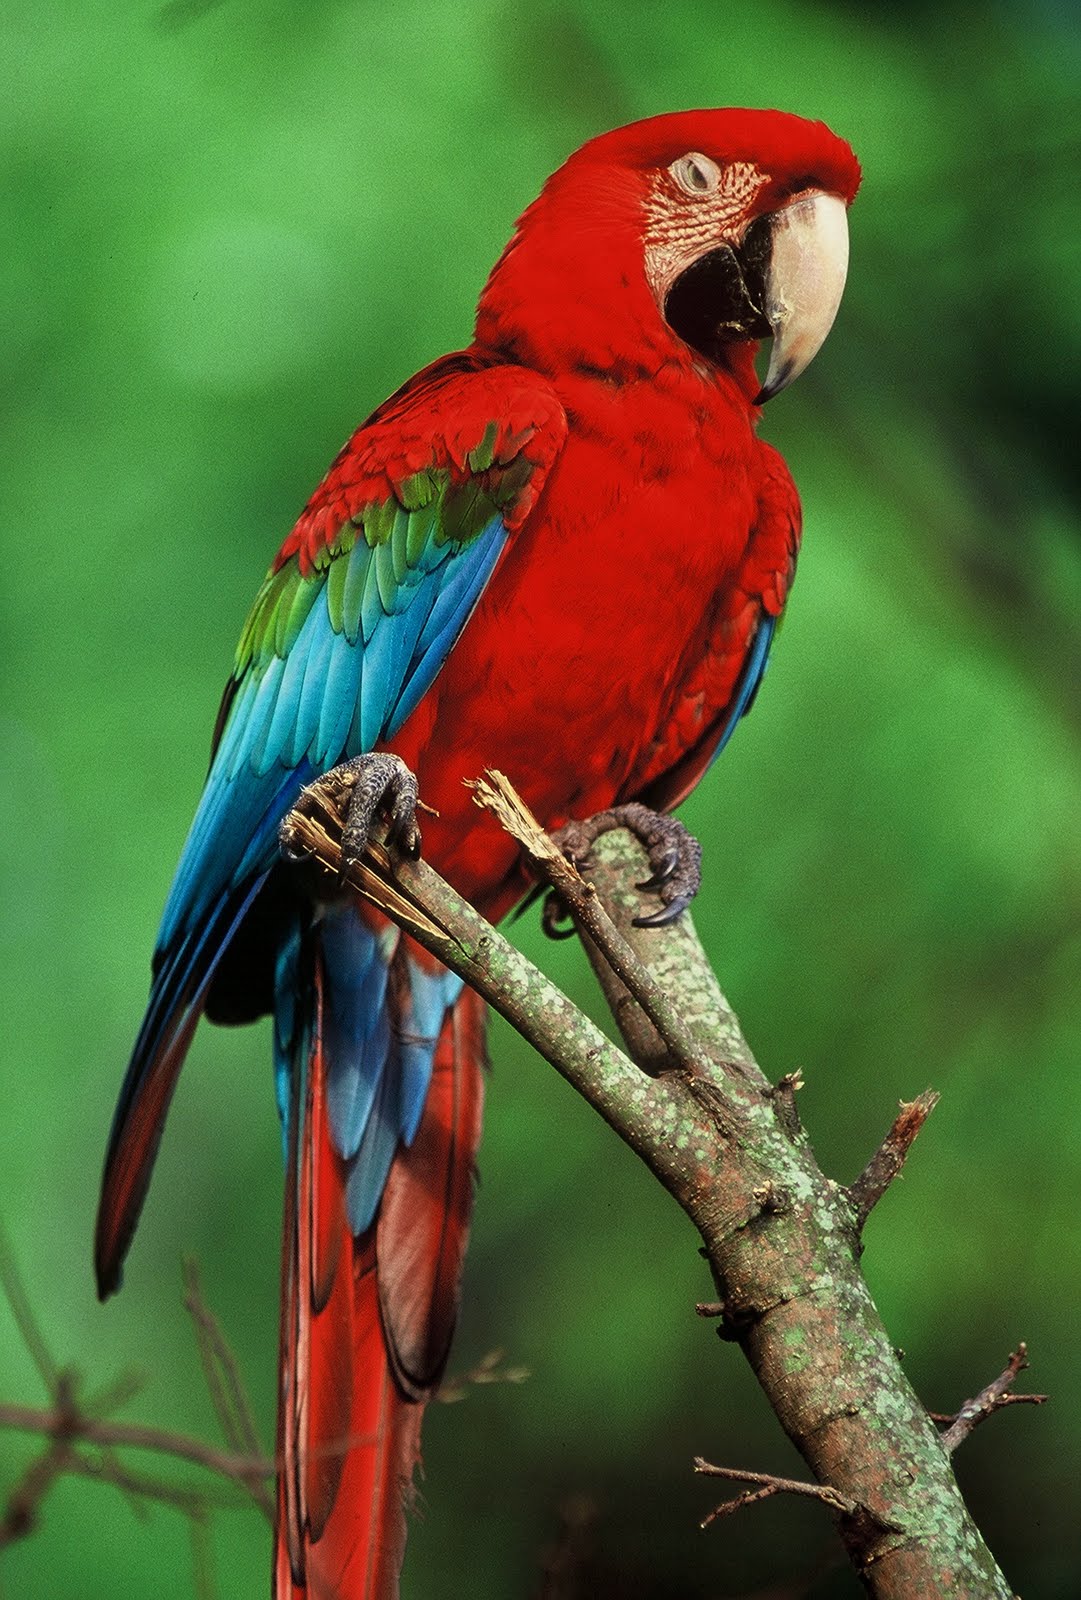 many diffrent kinds of animals at  tropical rainforest like birds